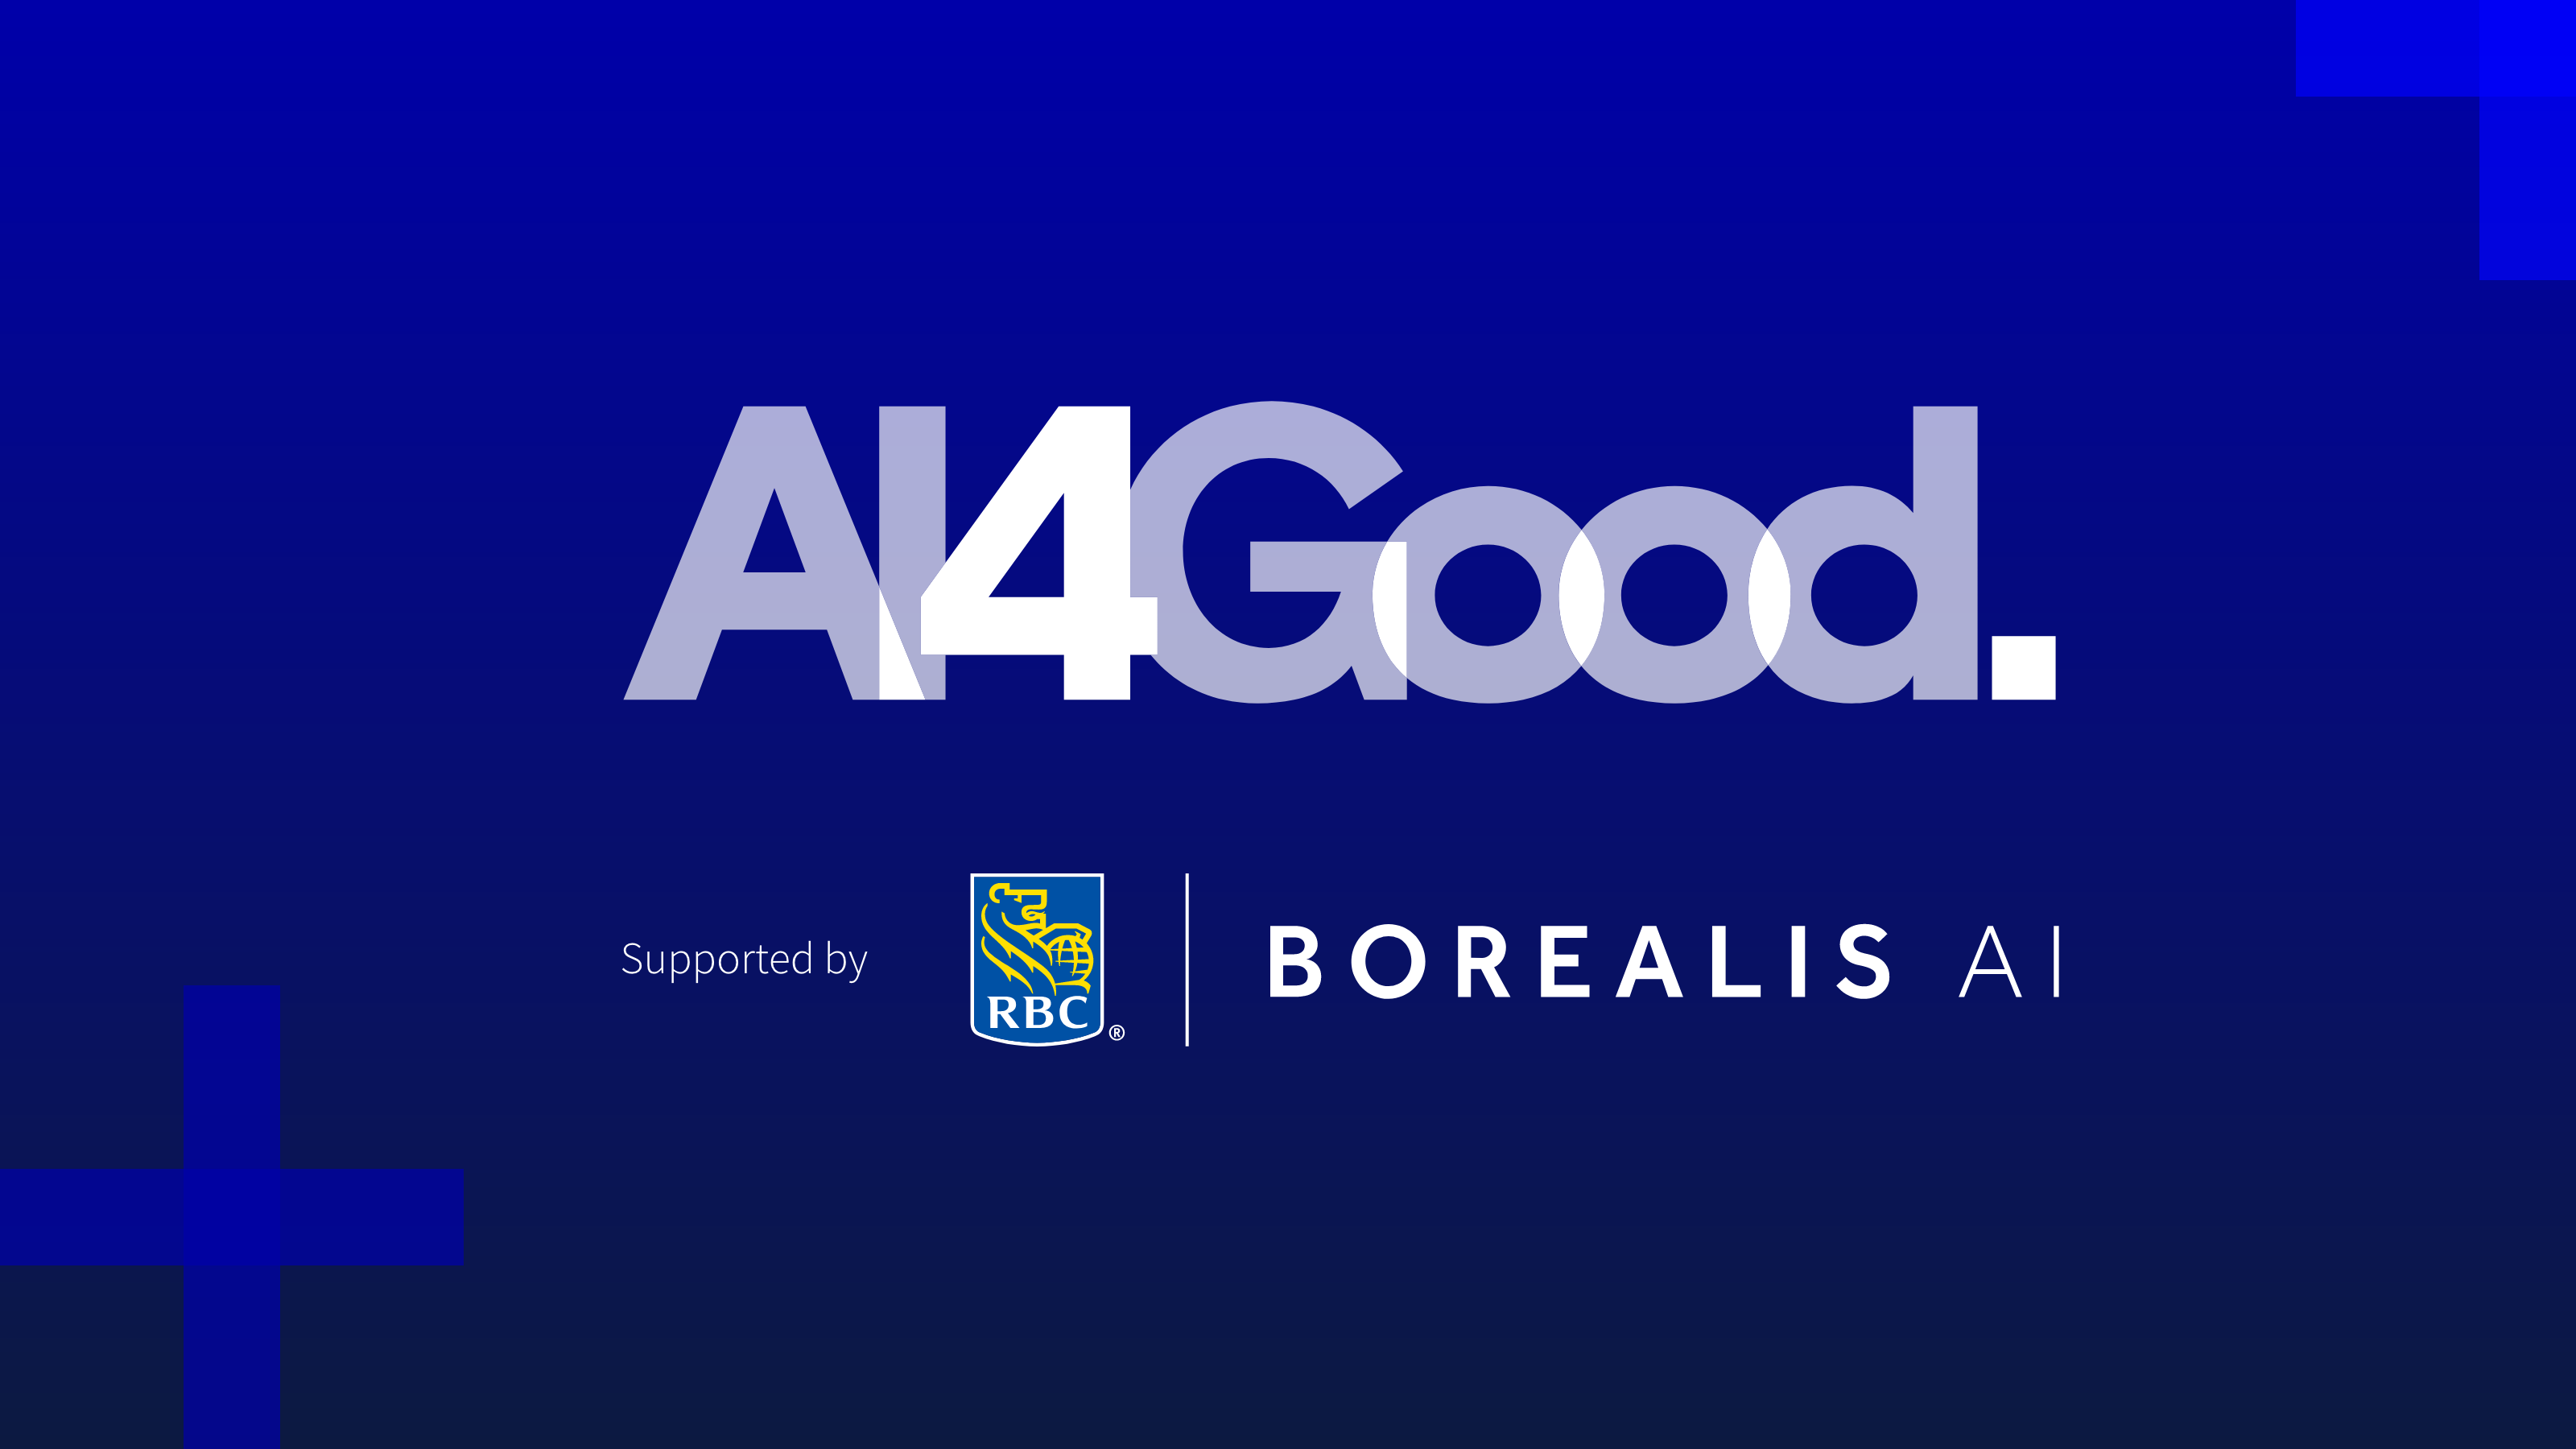 Featured image of "Why Borealis AI and RBC are supporting the AI4Good Lab" blog